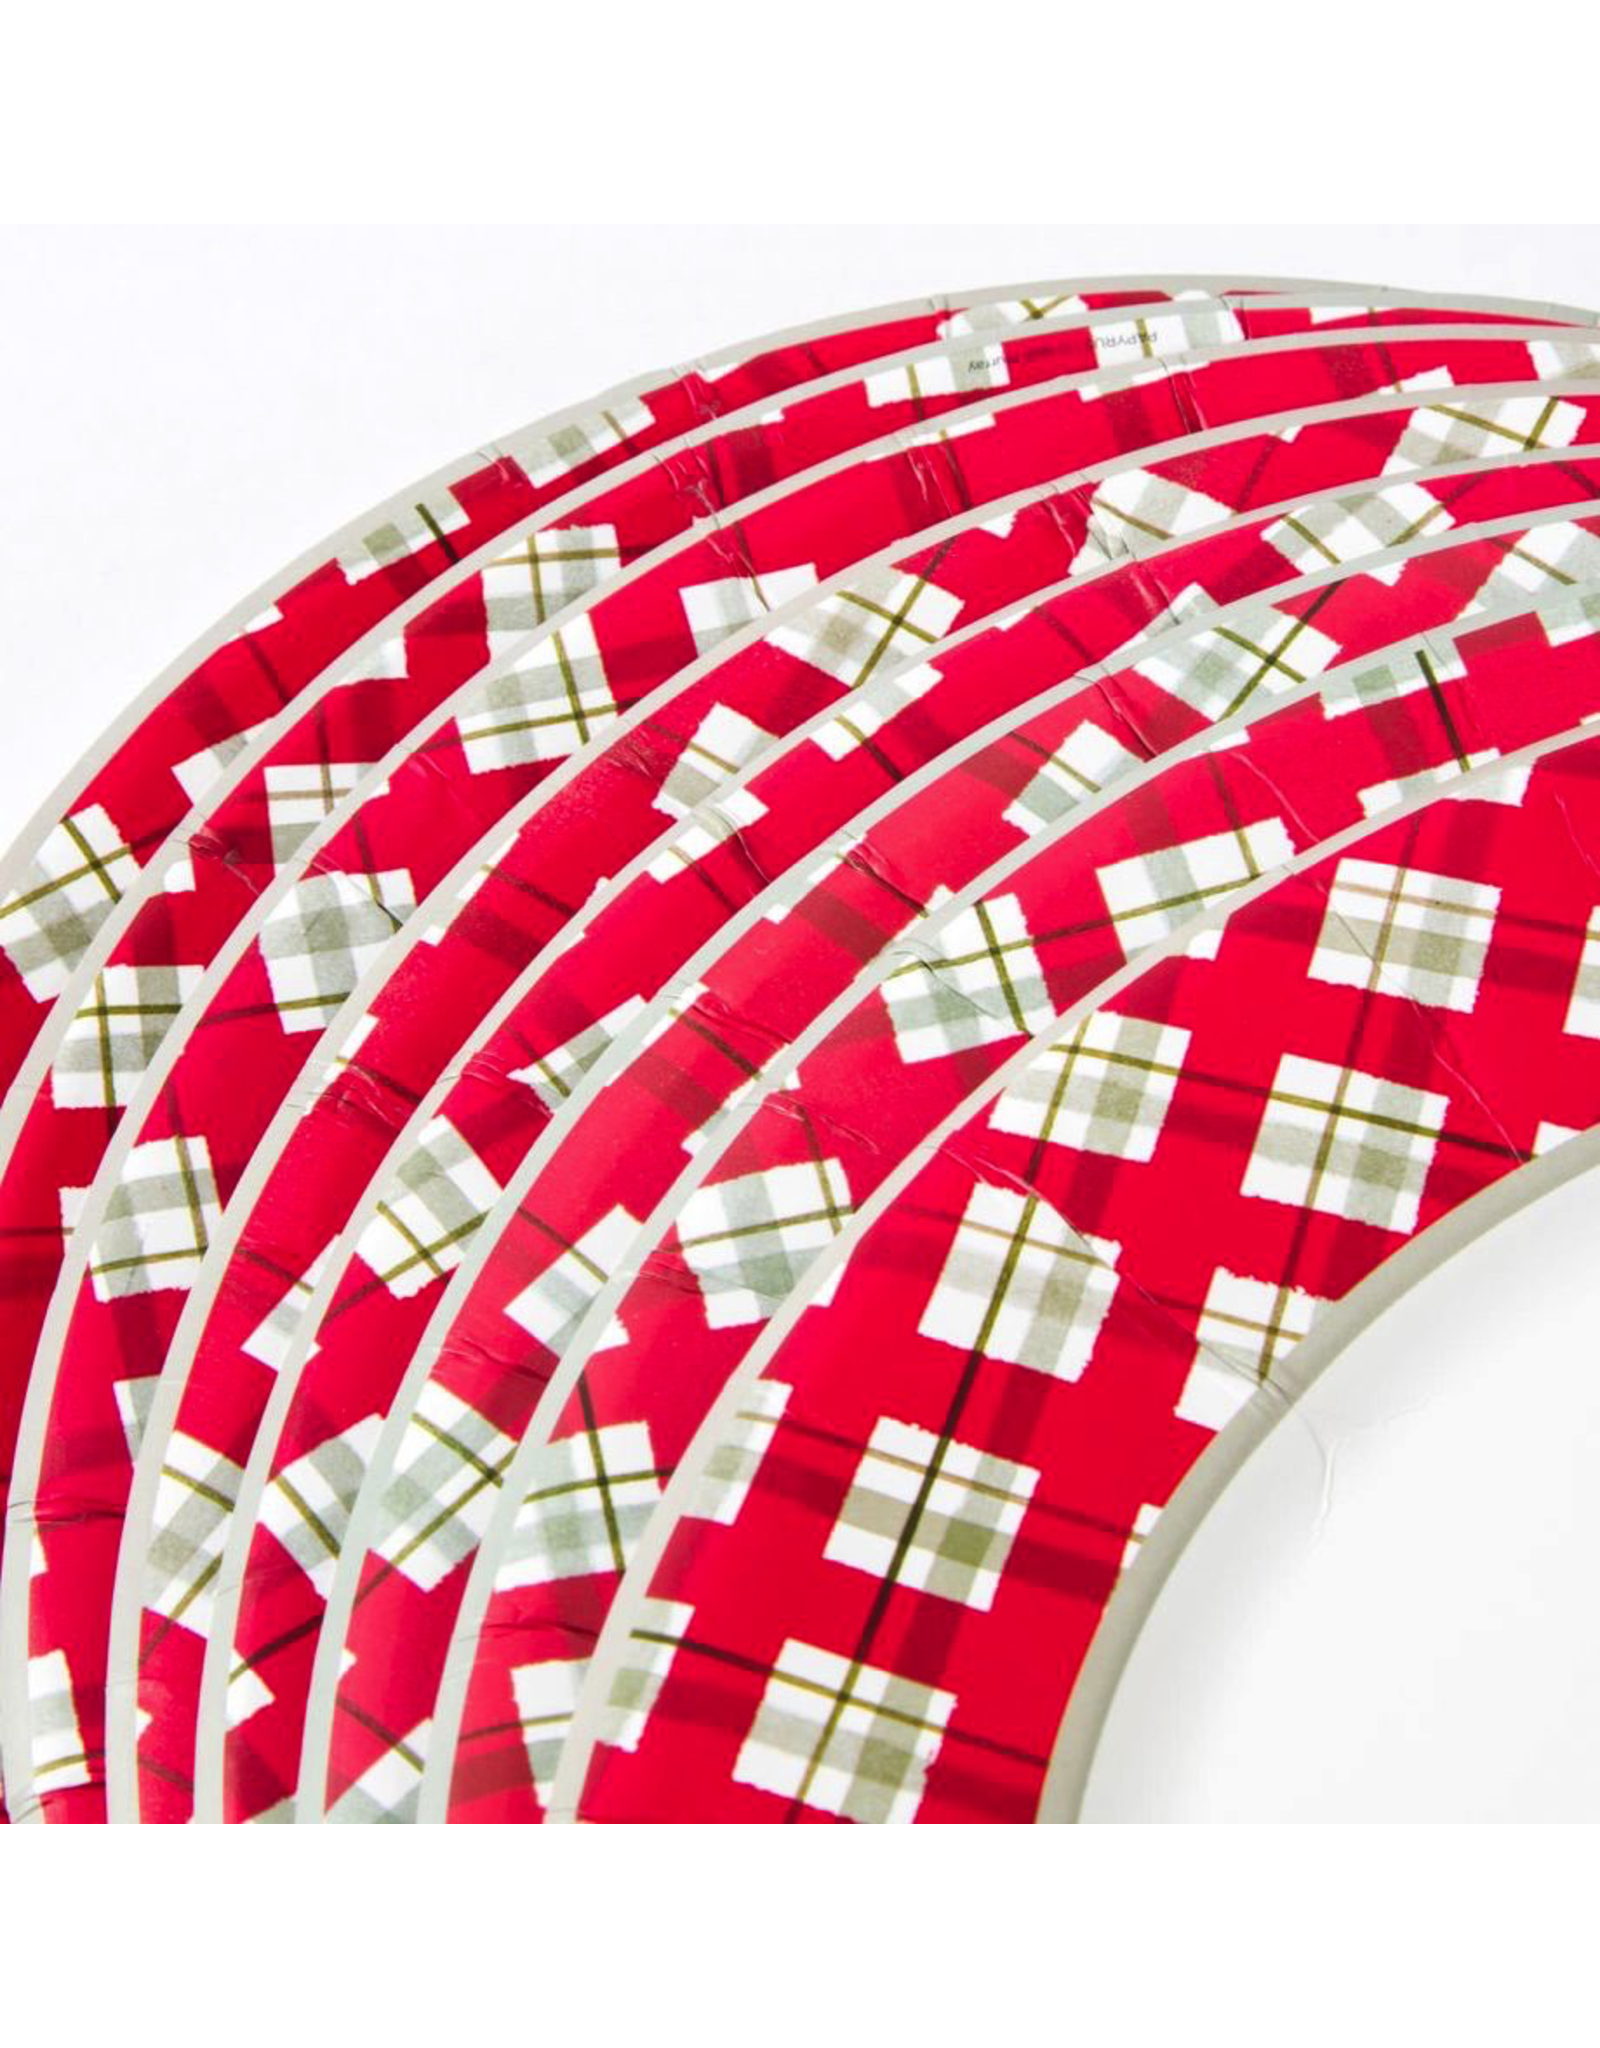 Papyrus Christmas Paper Dinner Plates 8pk Round with Plaid Border